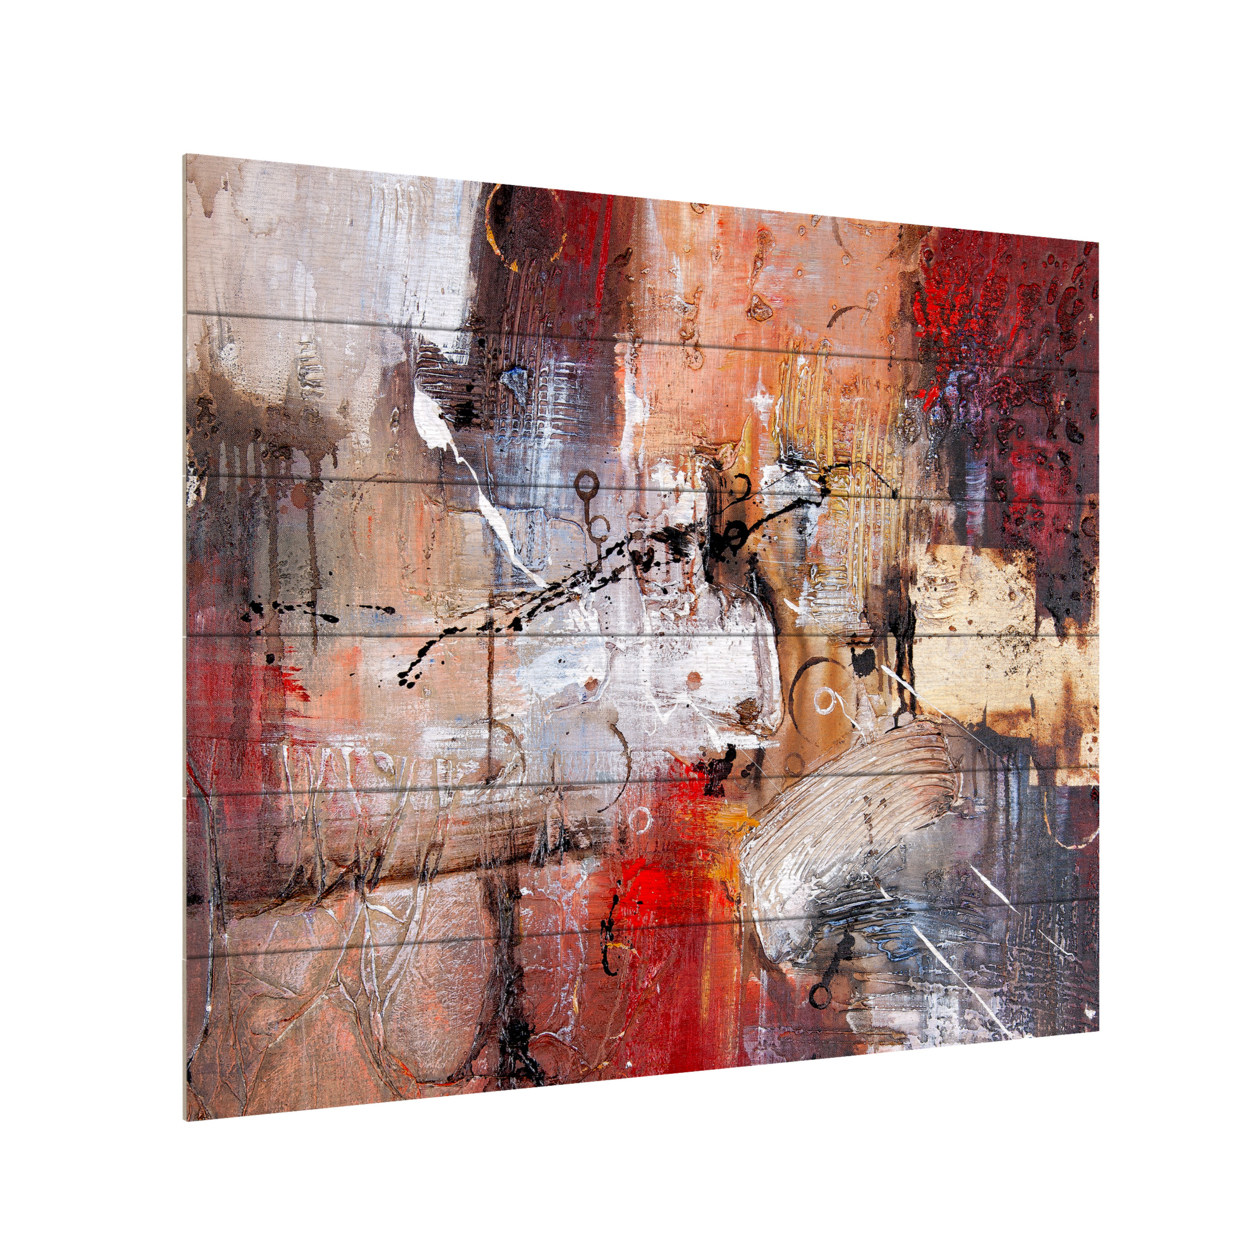 Wooden Slat Art 18 X 22 Inches Titled Cube Abstract V Ready To Hang Home Decor Picture